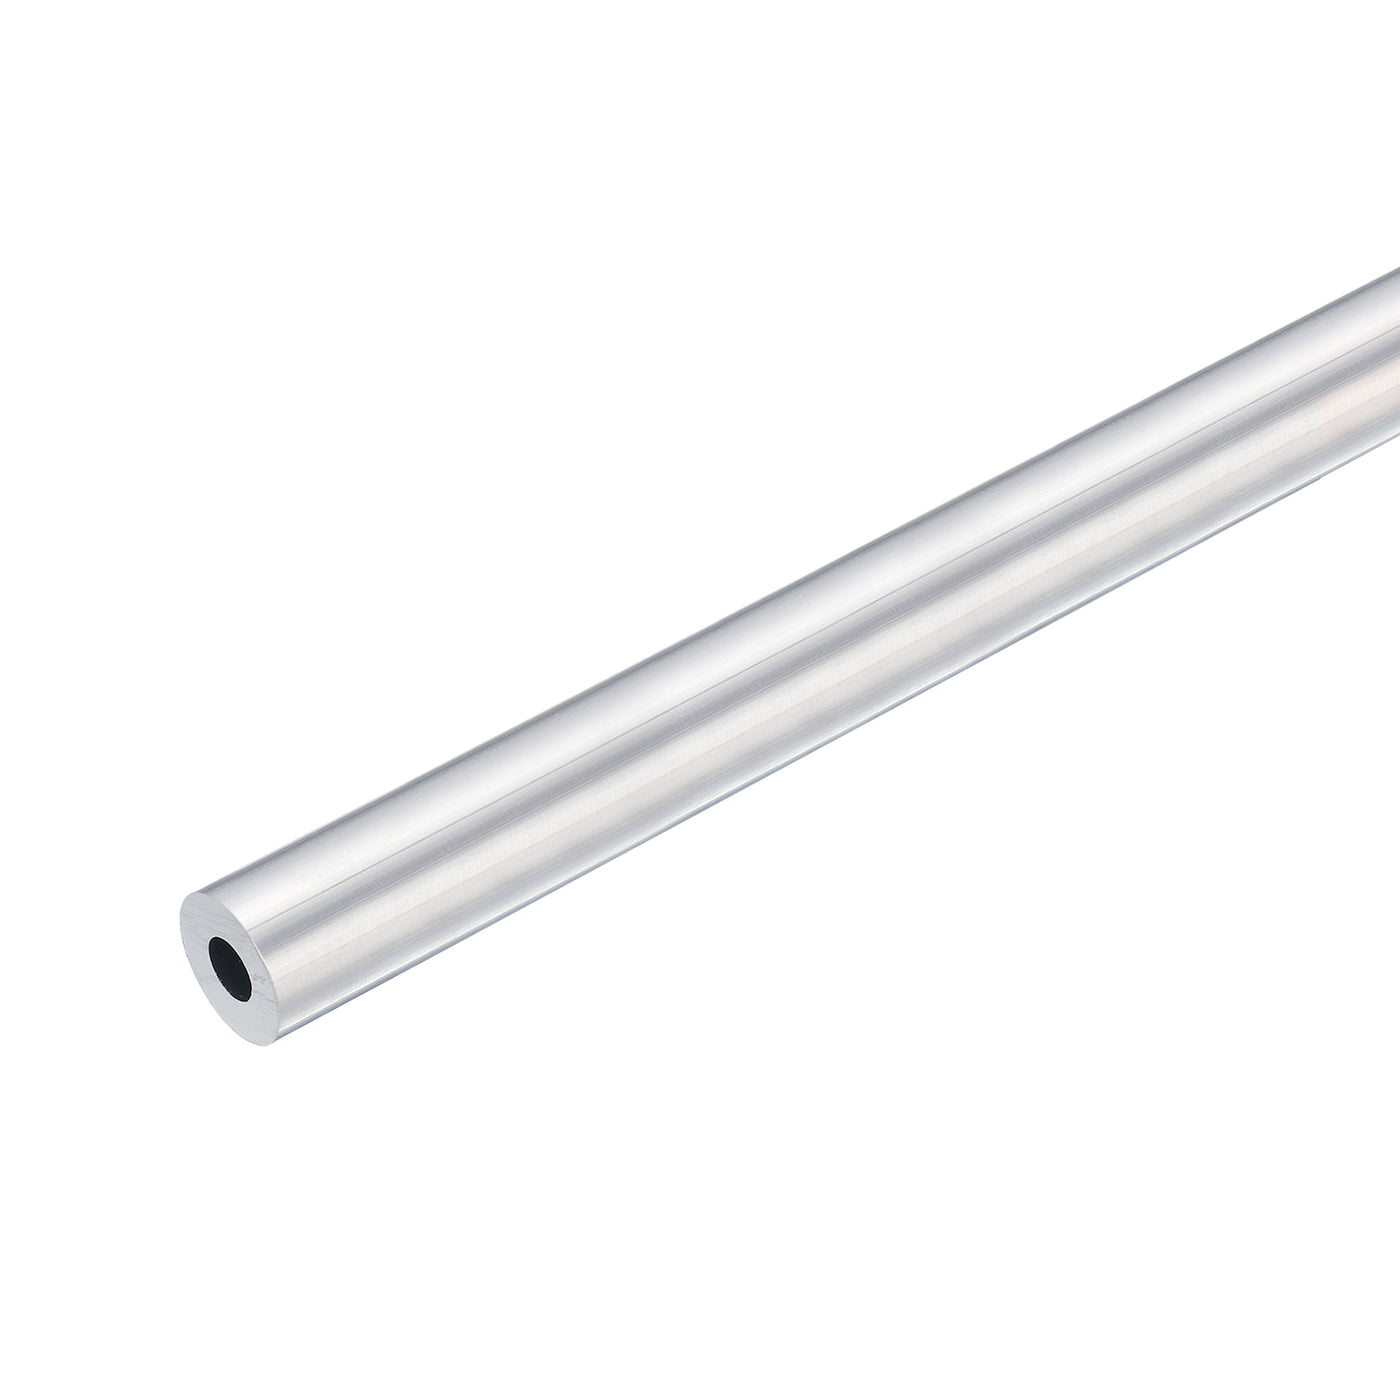 uxcell Uxcell 16mm OD 7mm Inner Dia 400mm Length 6063 Aluminum Tube for Industry DIY Project